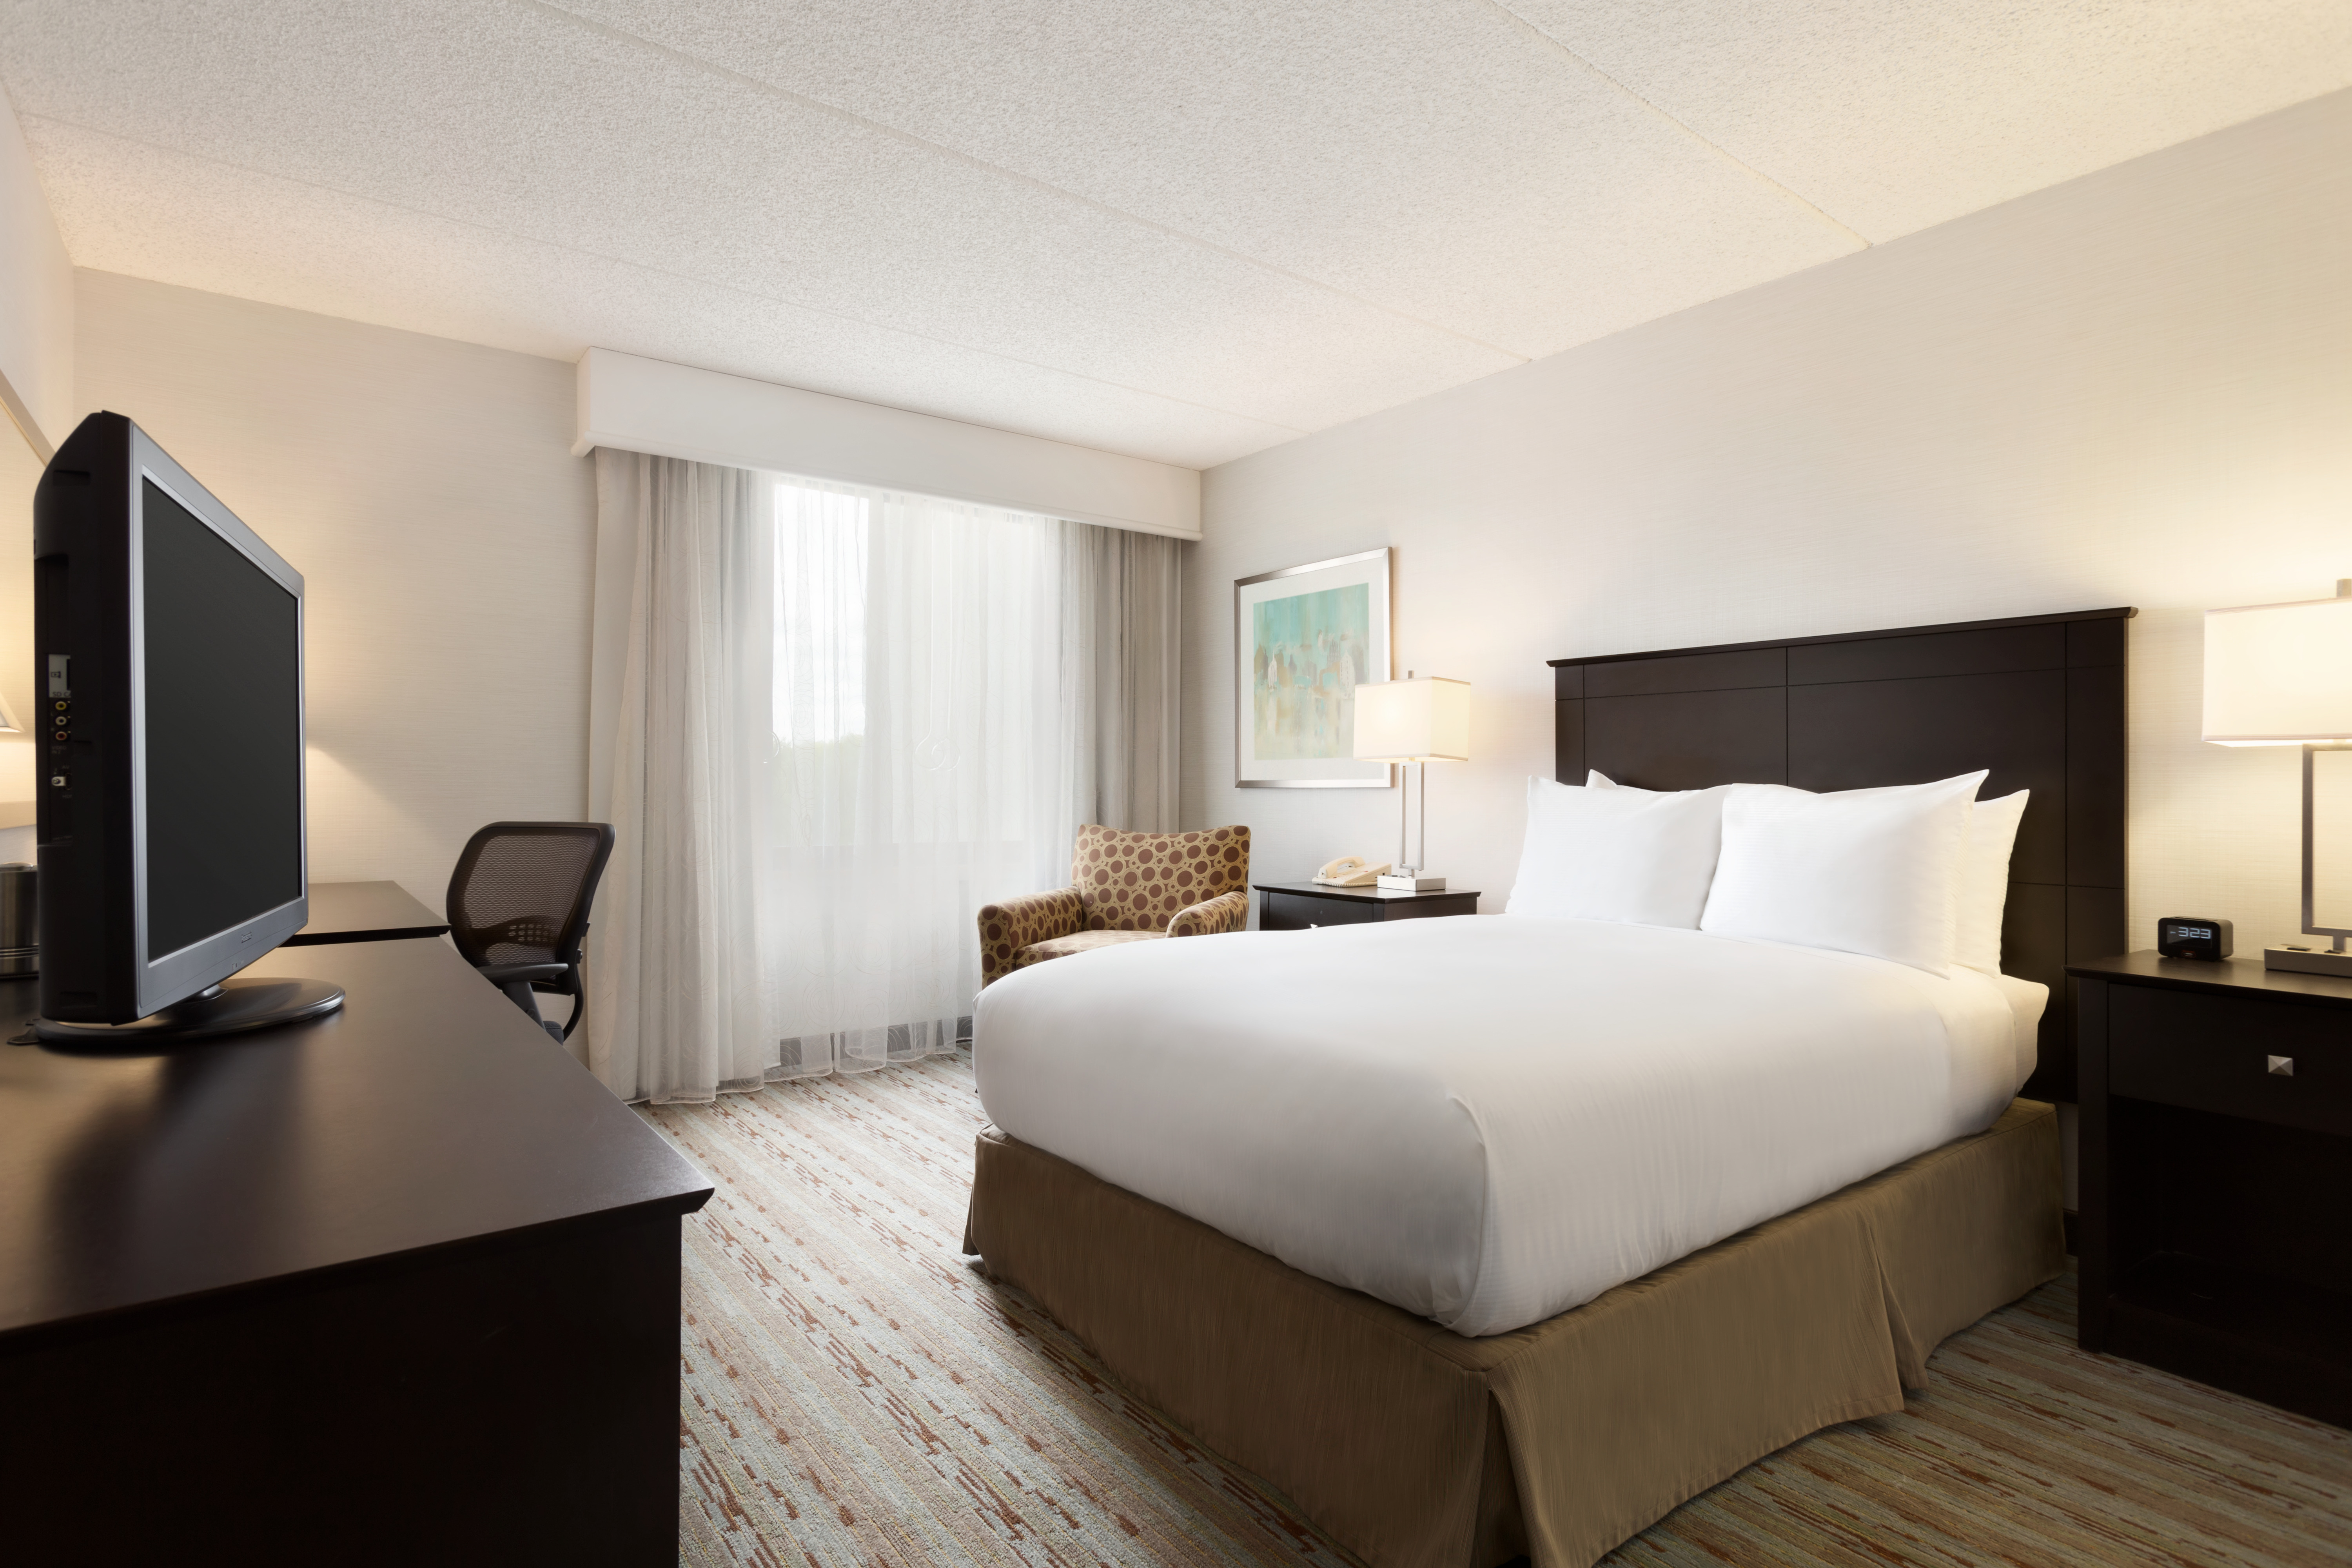 DoubleTree by Hilton Hotel Hartford - Bradley Airport, CT - Accessible Guest Room